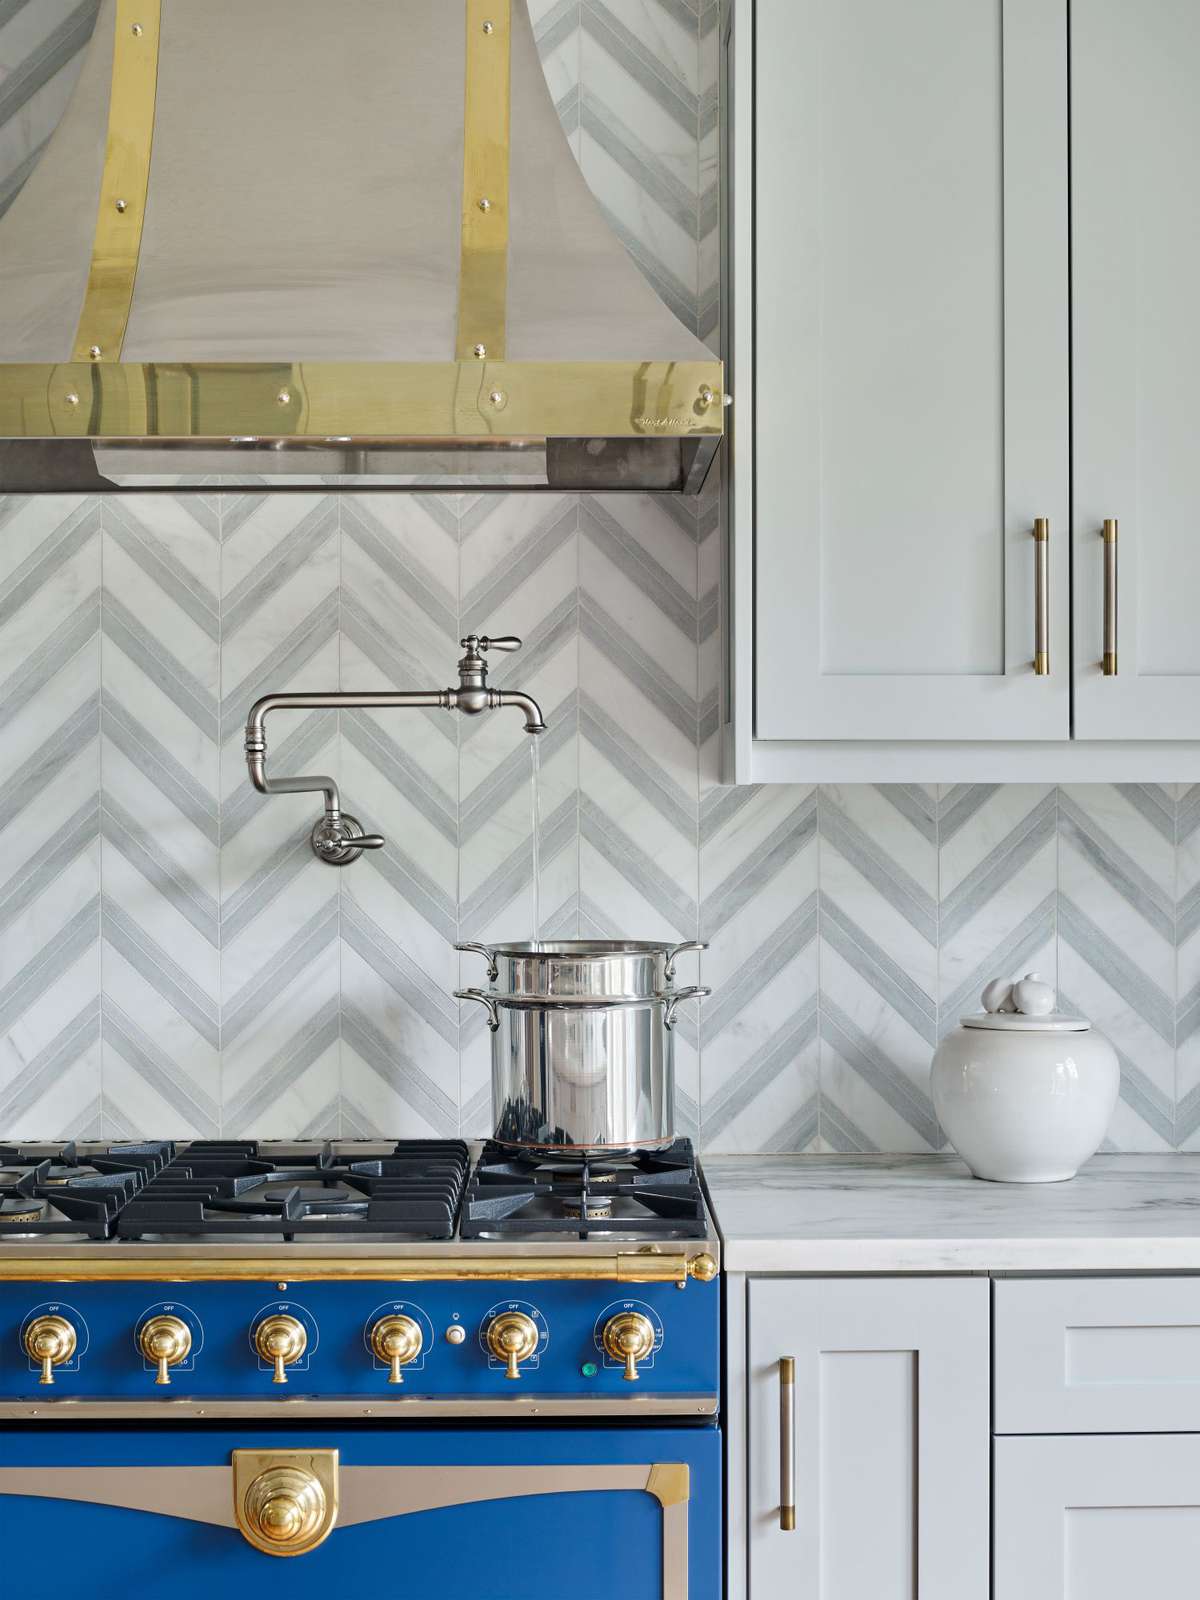 Mixed Finishes in Kitchen with Geometric Backsplash and Potfiller